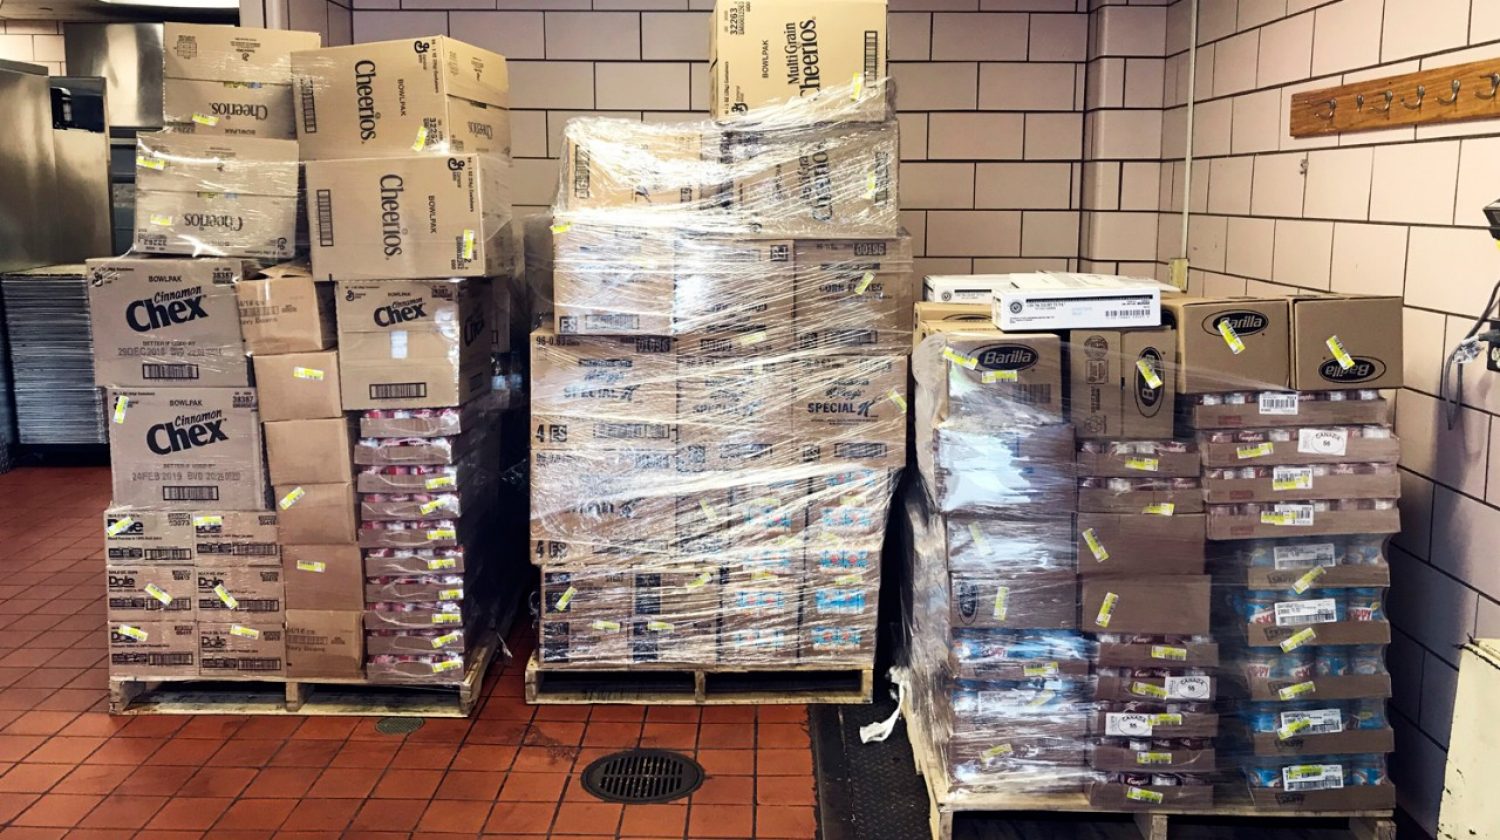 Stacks of donated food cases